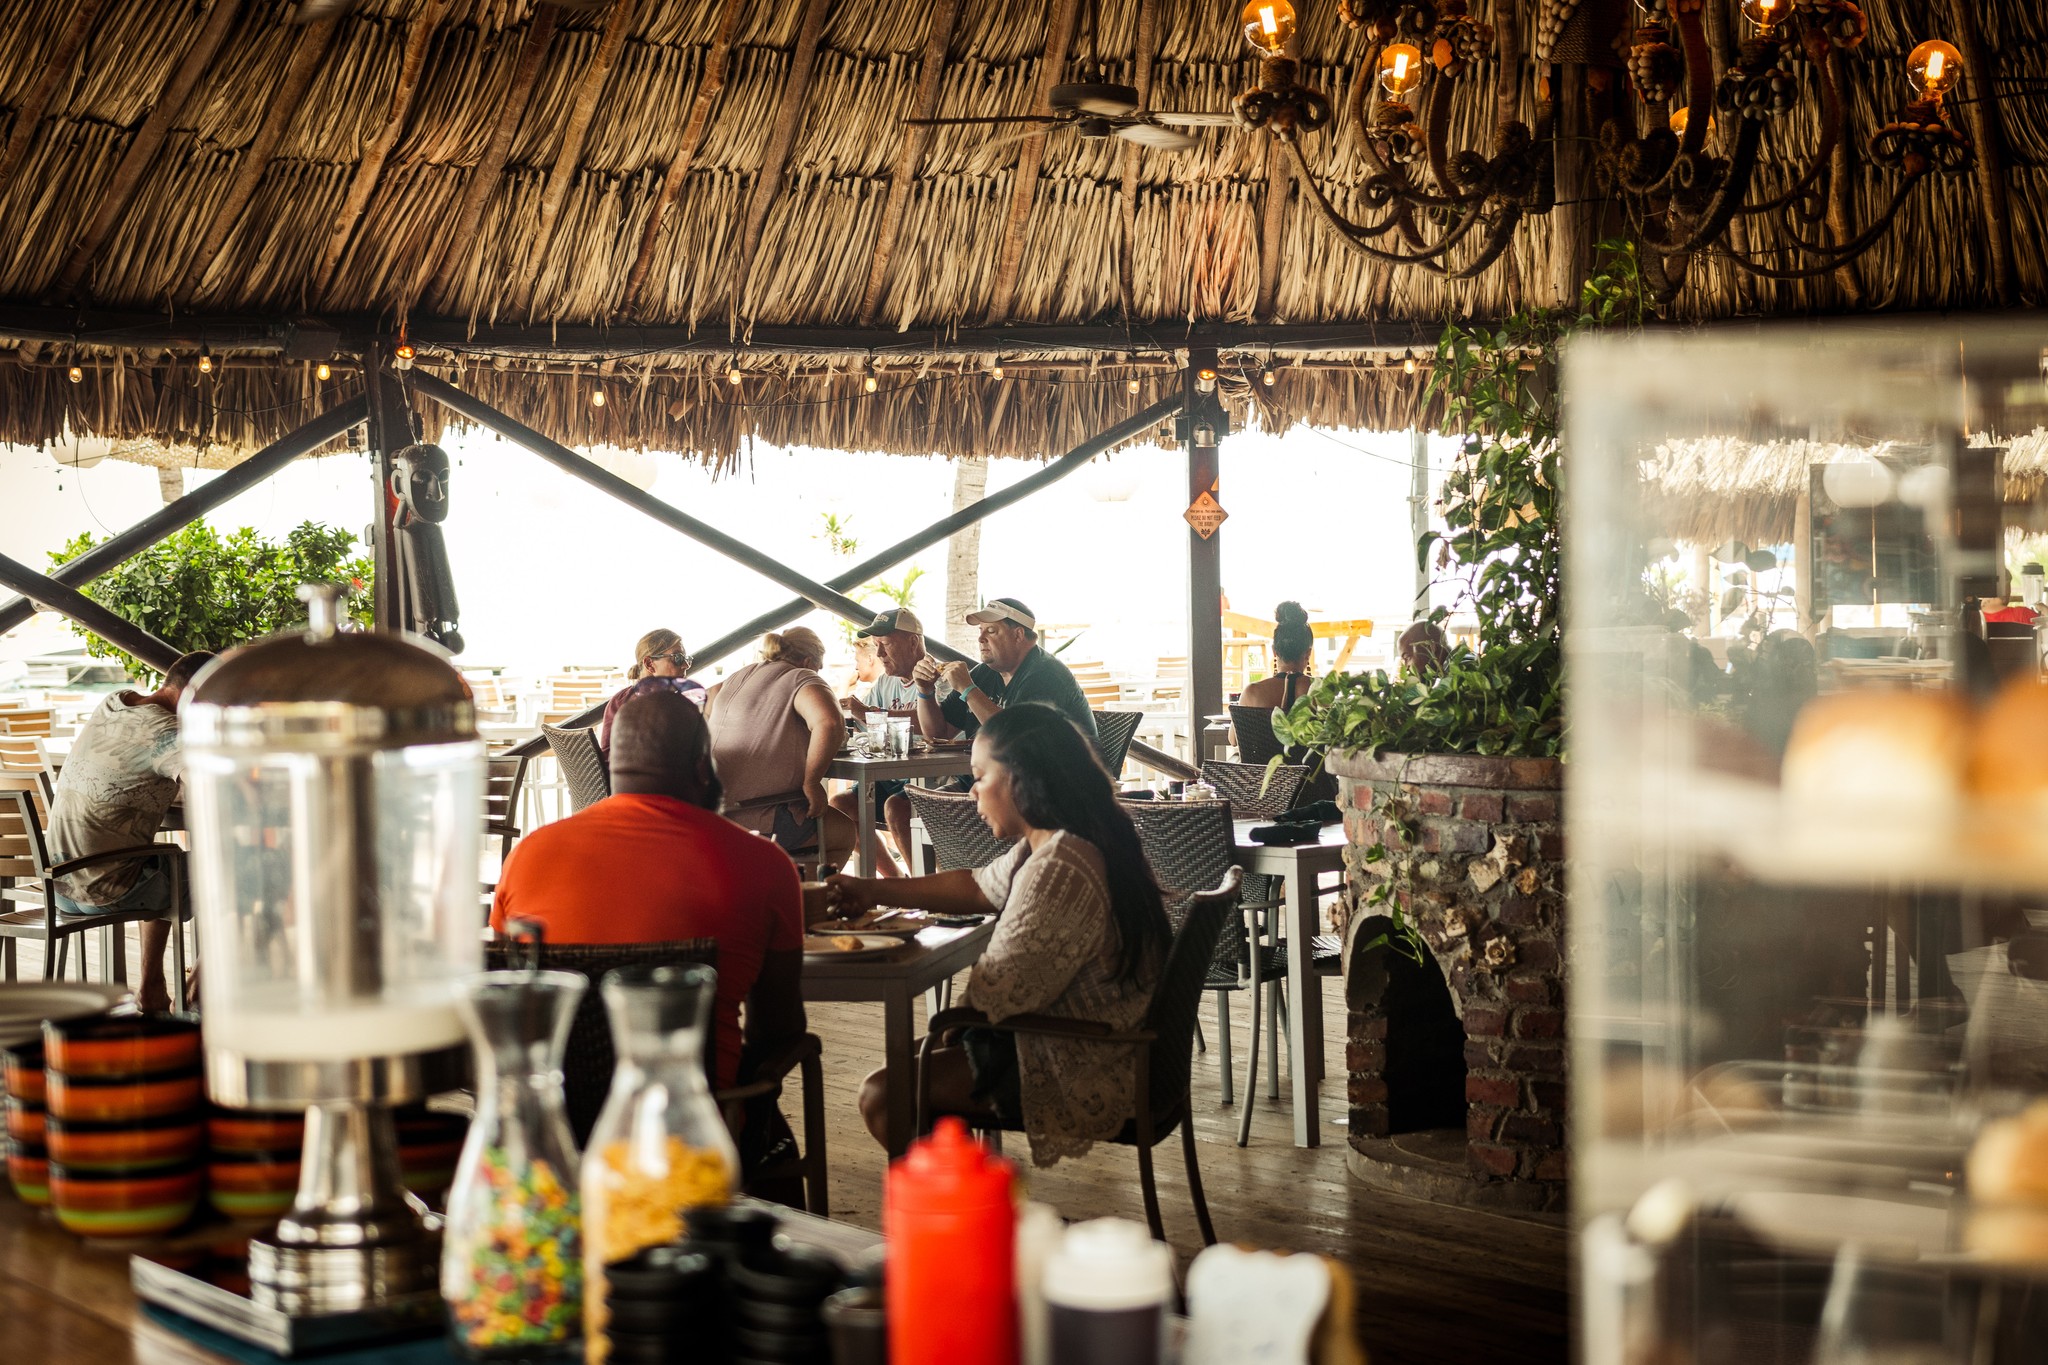 What to Know About MooMba Beach Bar & Restaurant Aruba